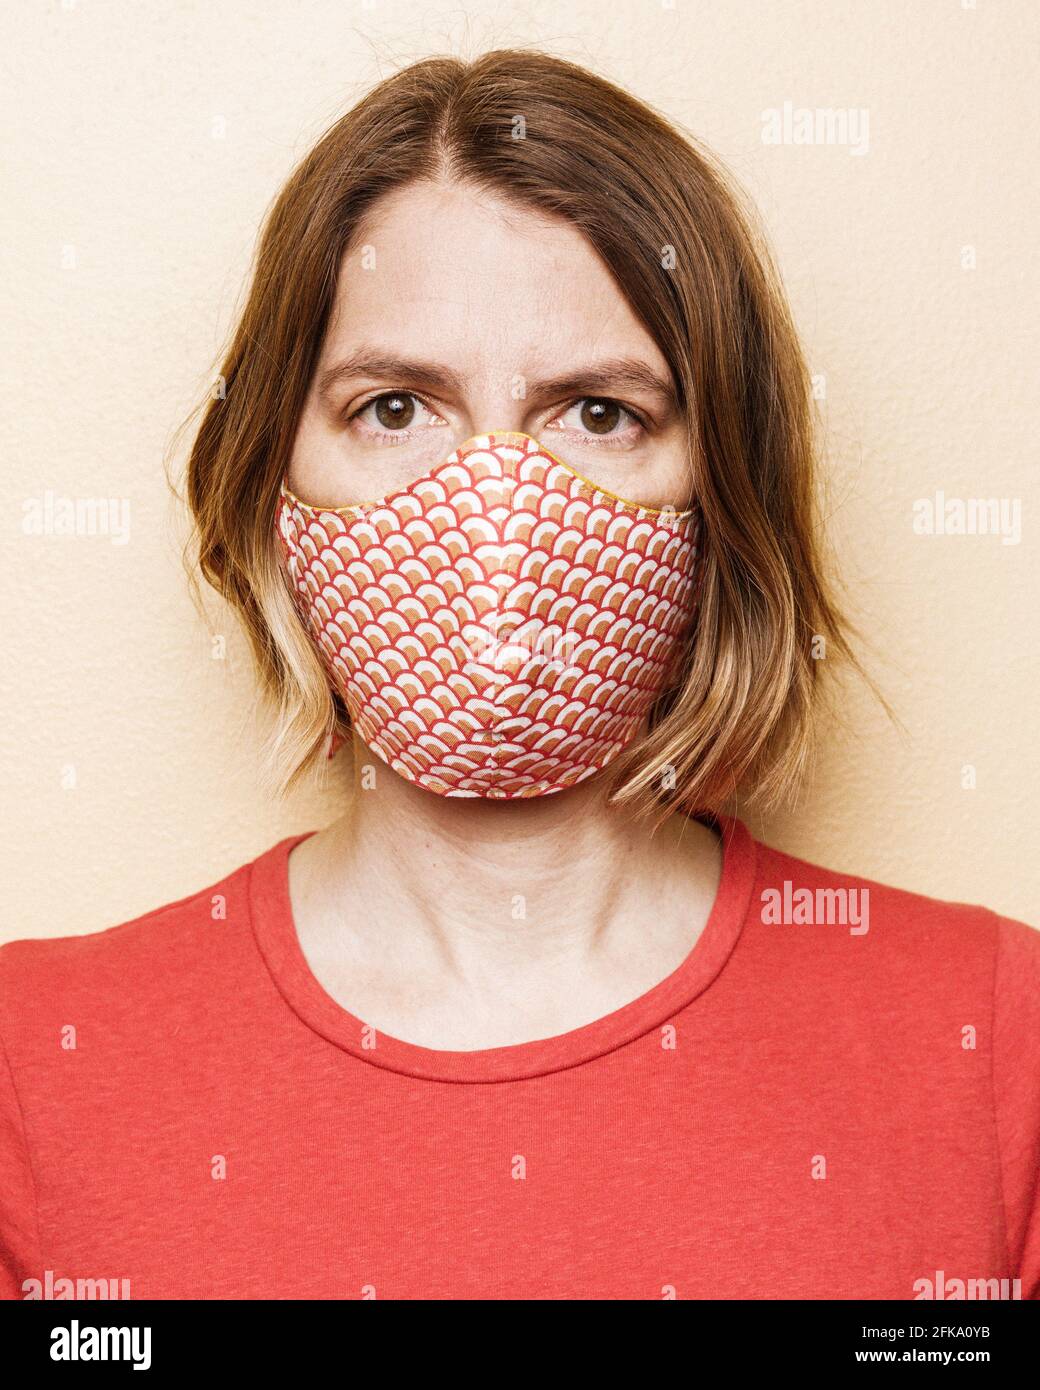 portrait of a woman with a red shirt and chin length hair wearing a hand sewn mask to cover her nose and mouth from COVID. Stock Photo